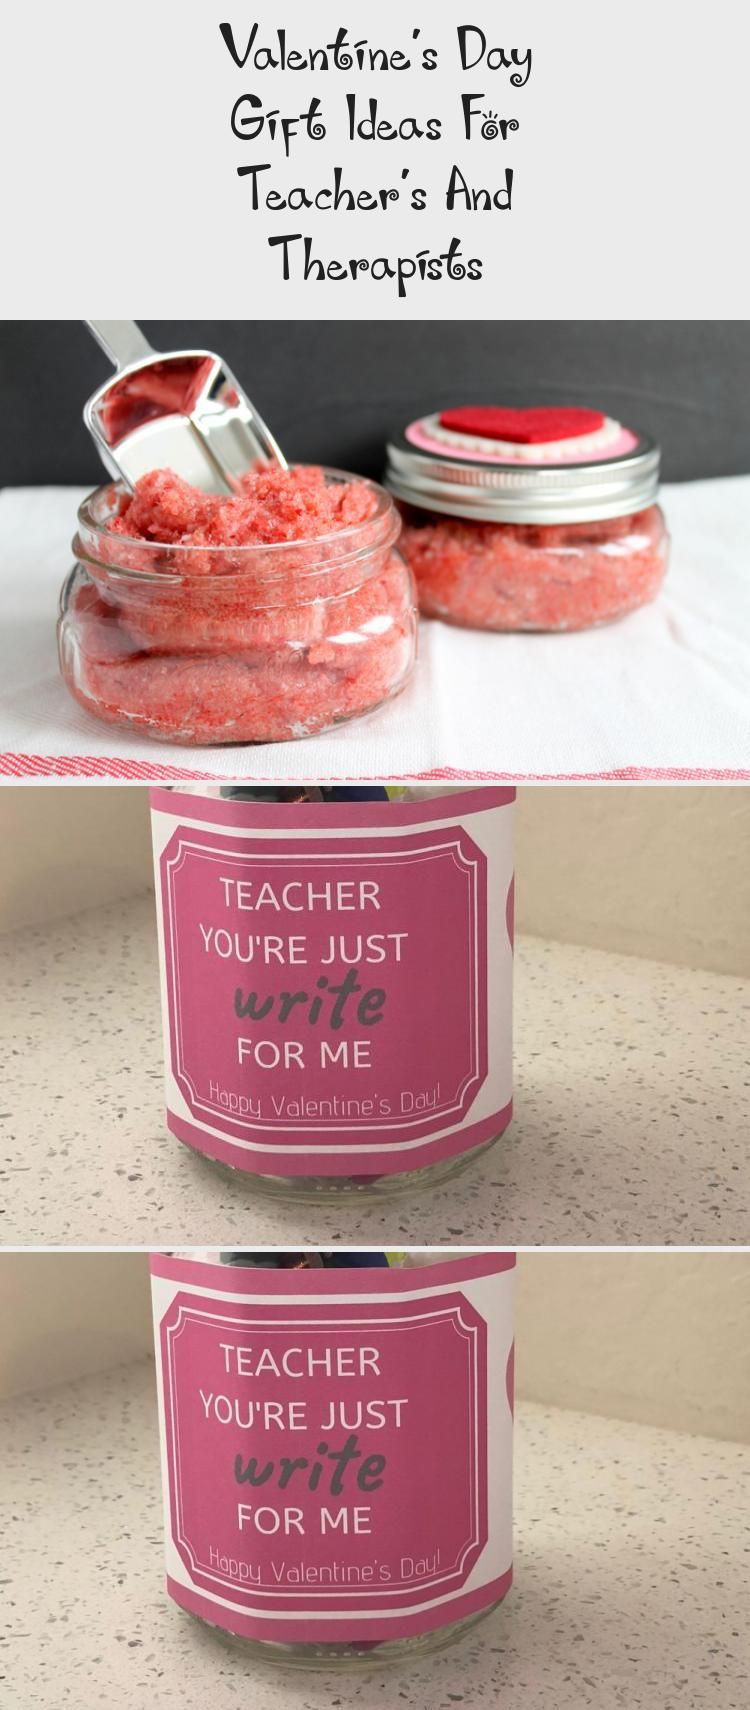 Valentine Gift Ideas For Male Teachers
 Valentine’s Day Gift Ideas For Teacher’s And Therapists